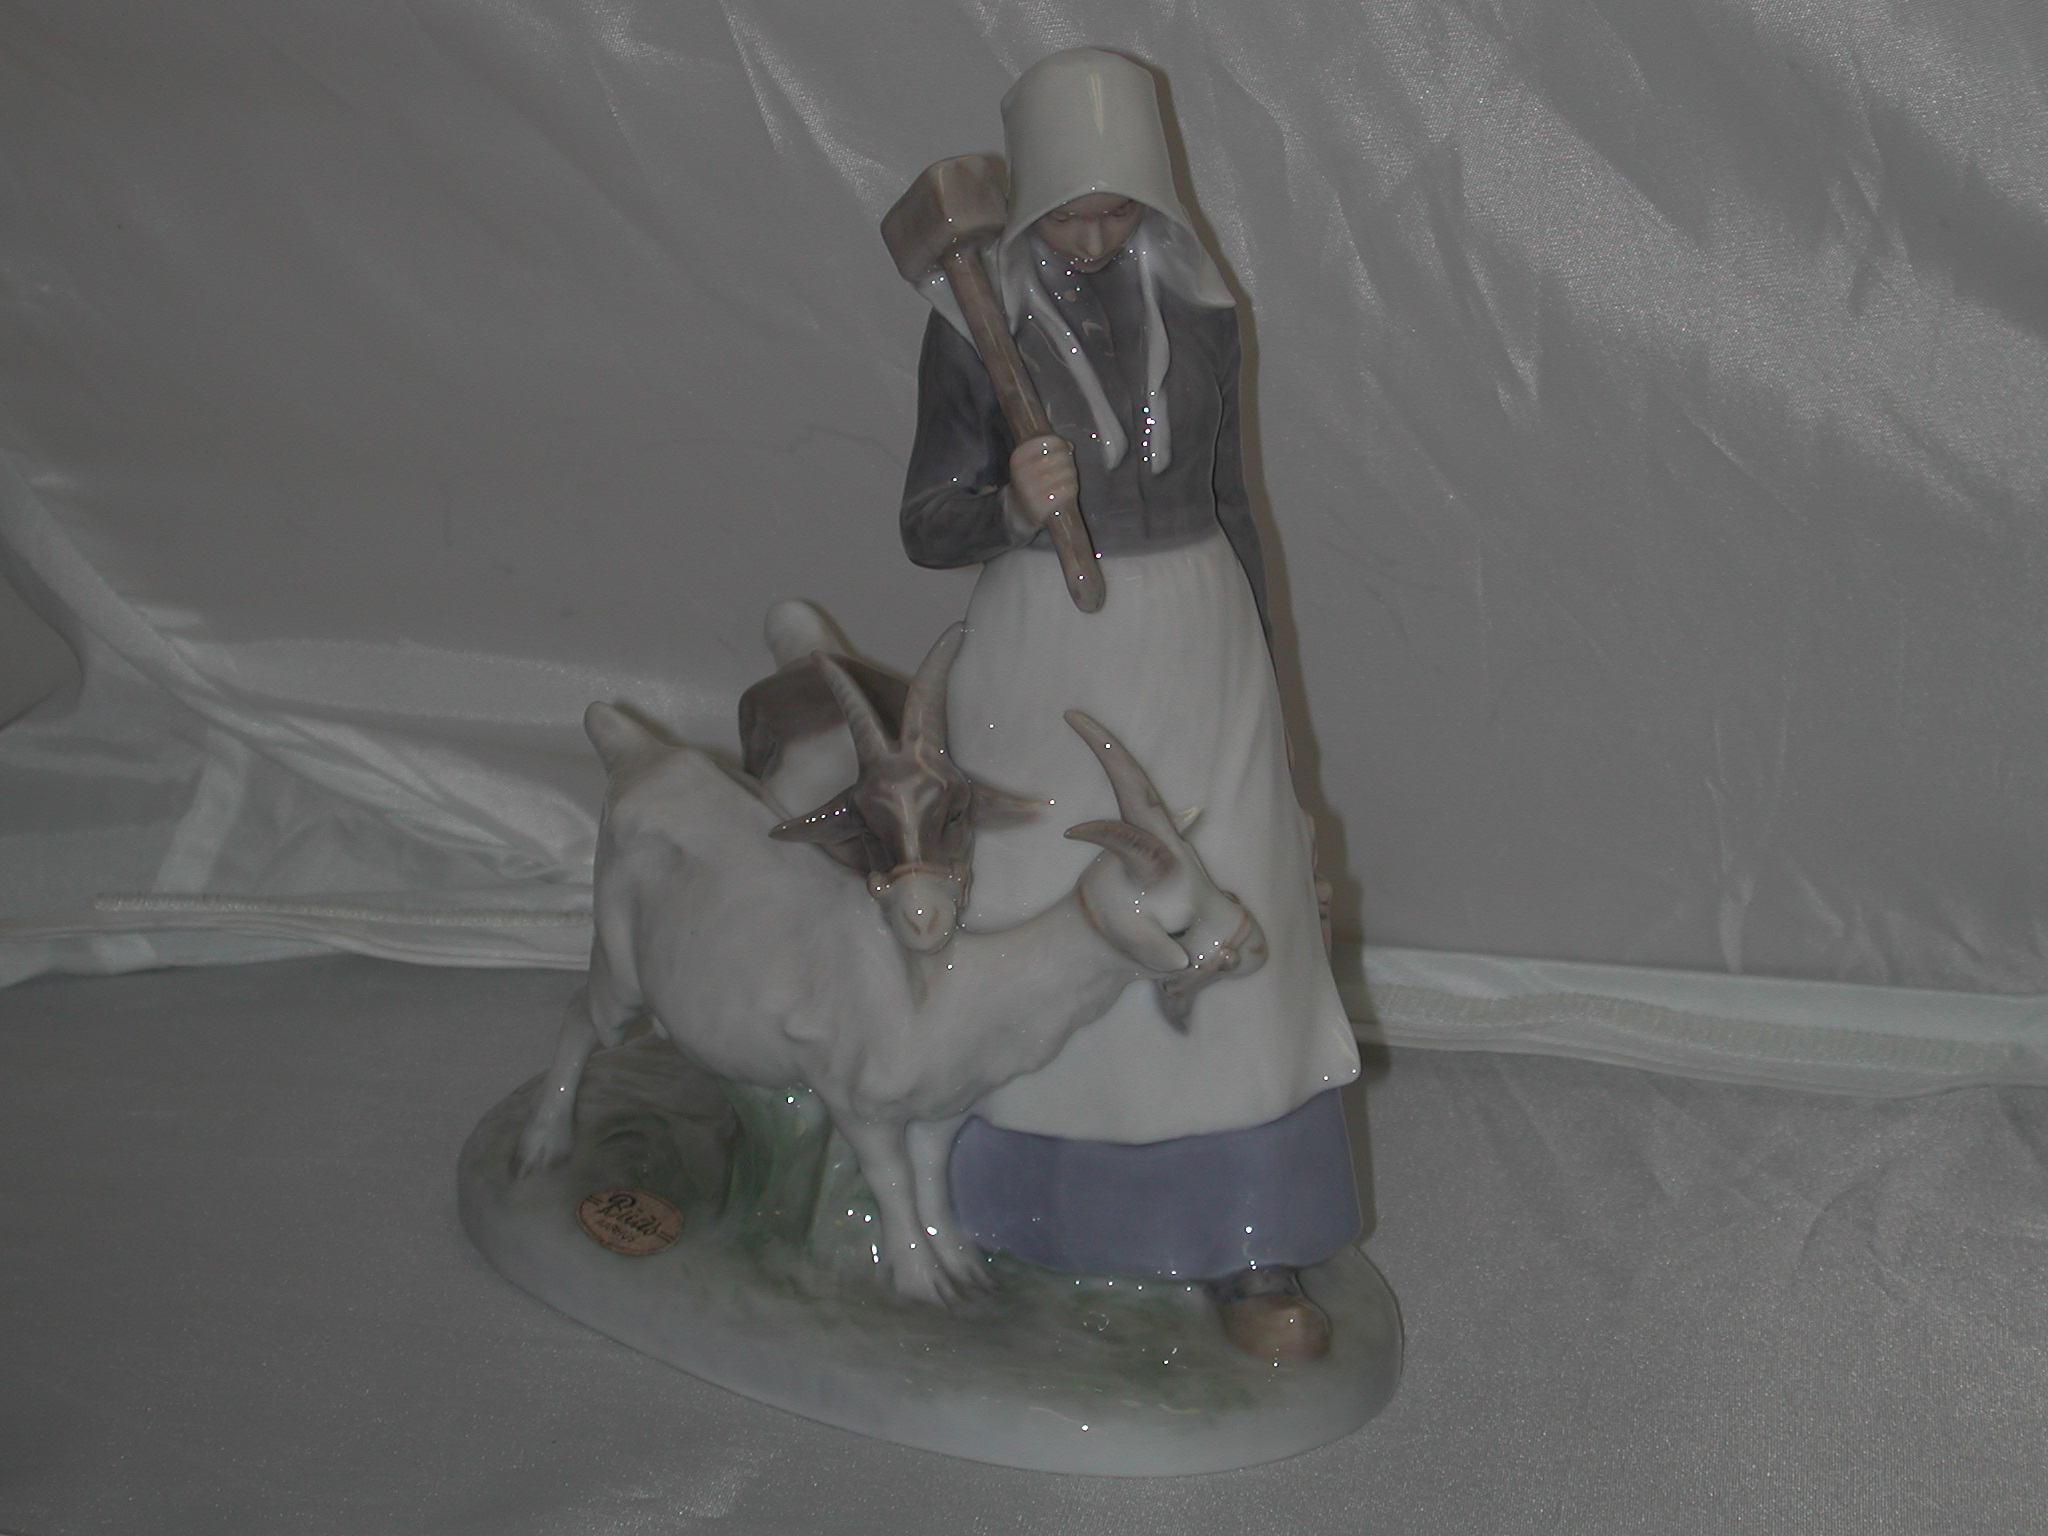 Royal Copenhagen #694 Girl with Goats 9 1/2 inches tall